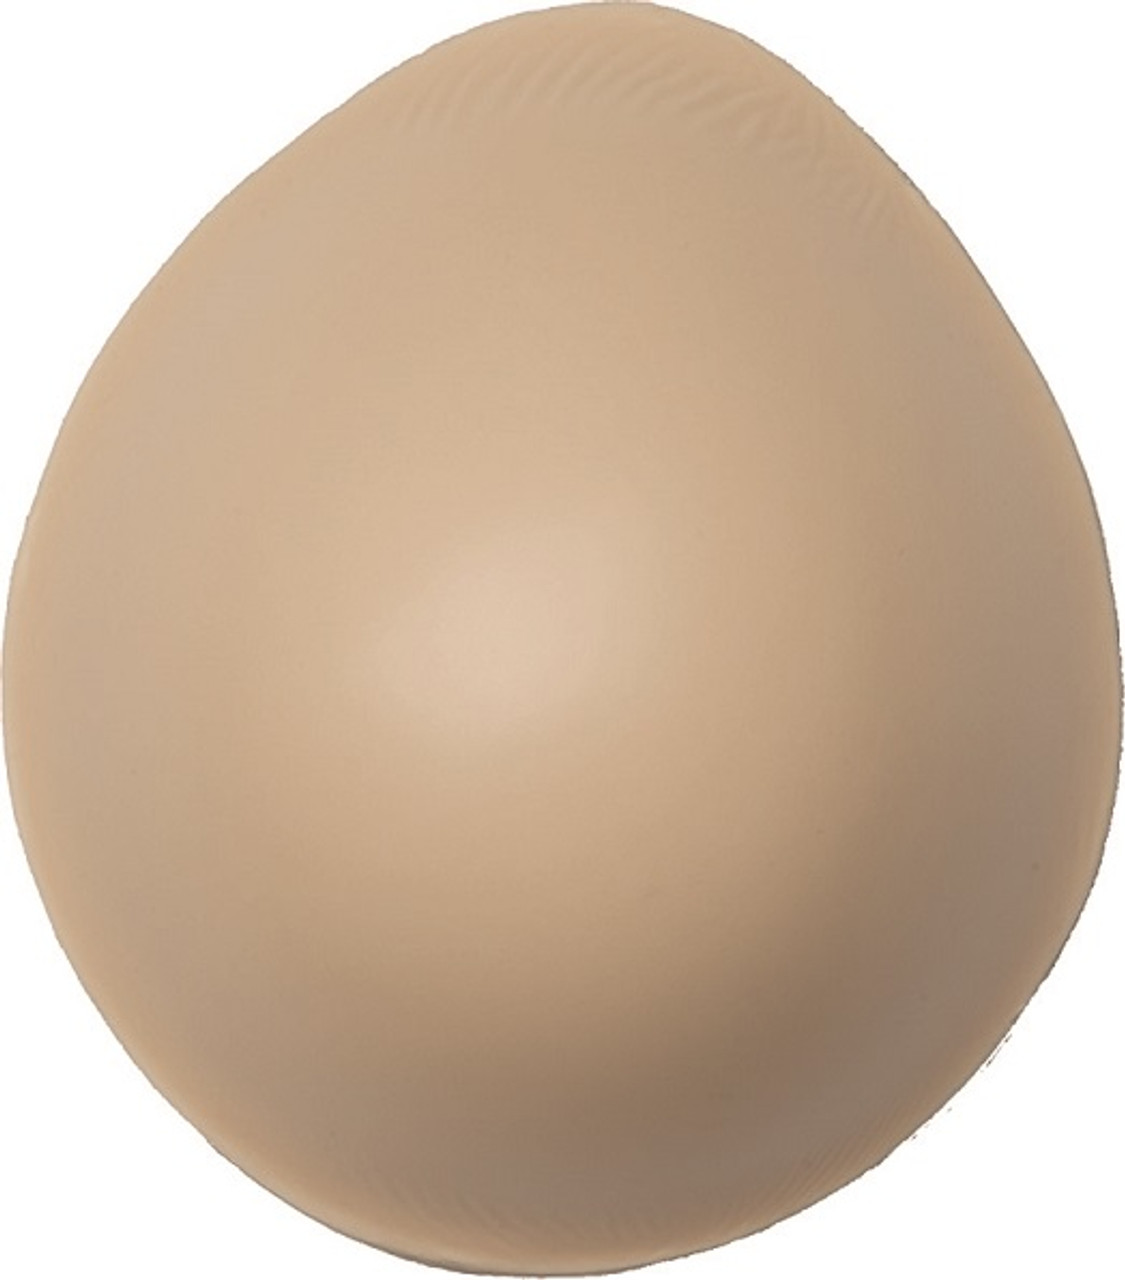 Nearly Me Breast Prosthesis  Super Soft Ultra Lightweight Form